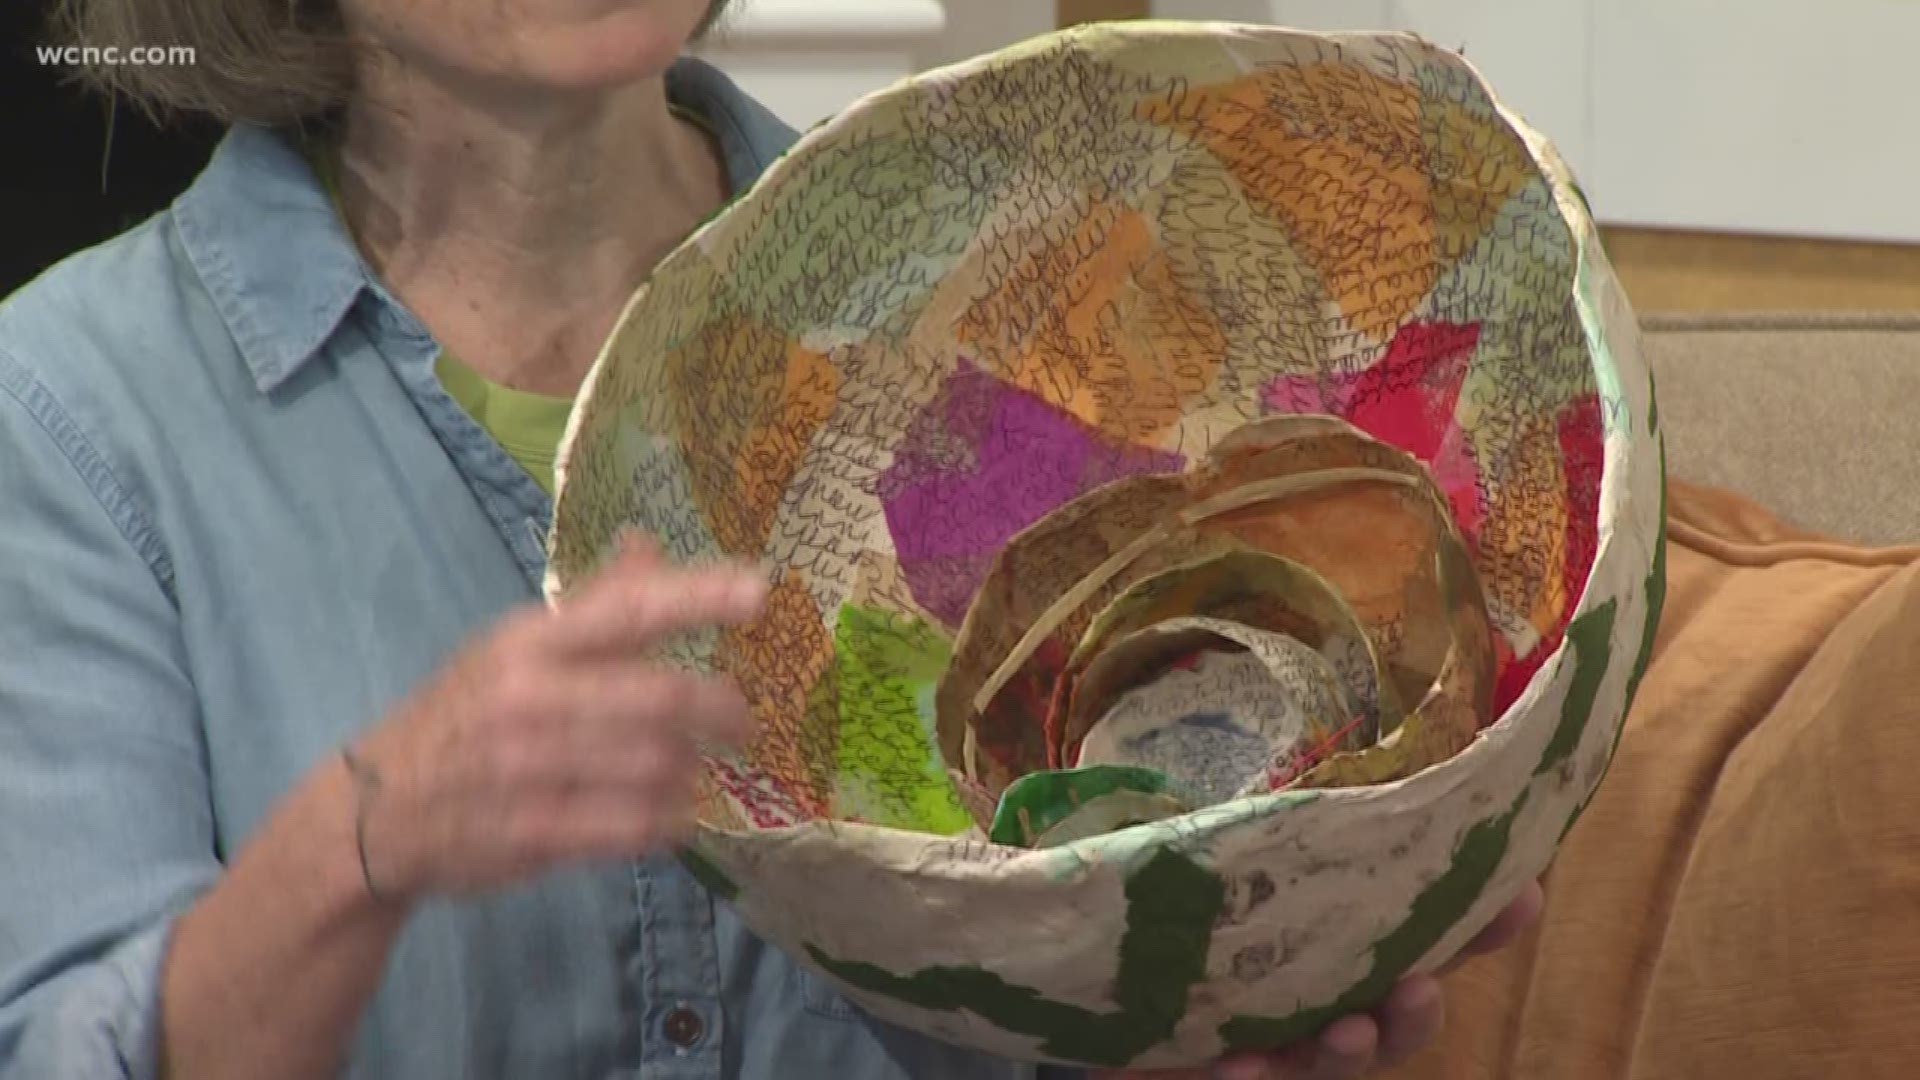 A local event is giving women who have experienced sexual assault a way to connect with others by creating story bowls to express their feelings.